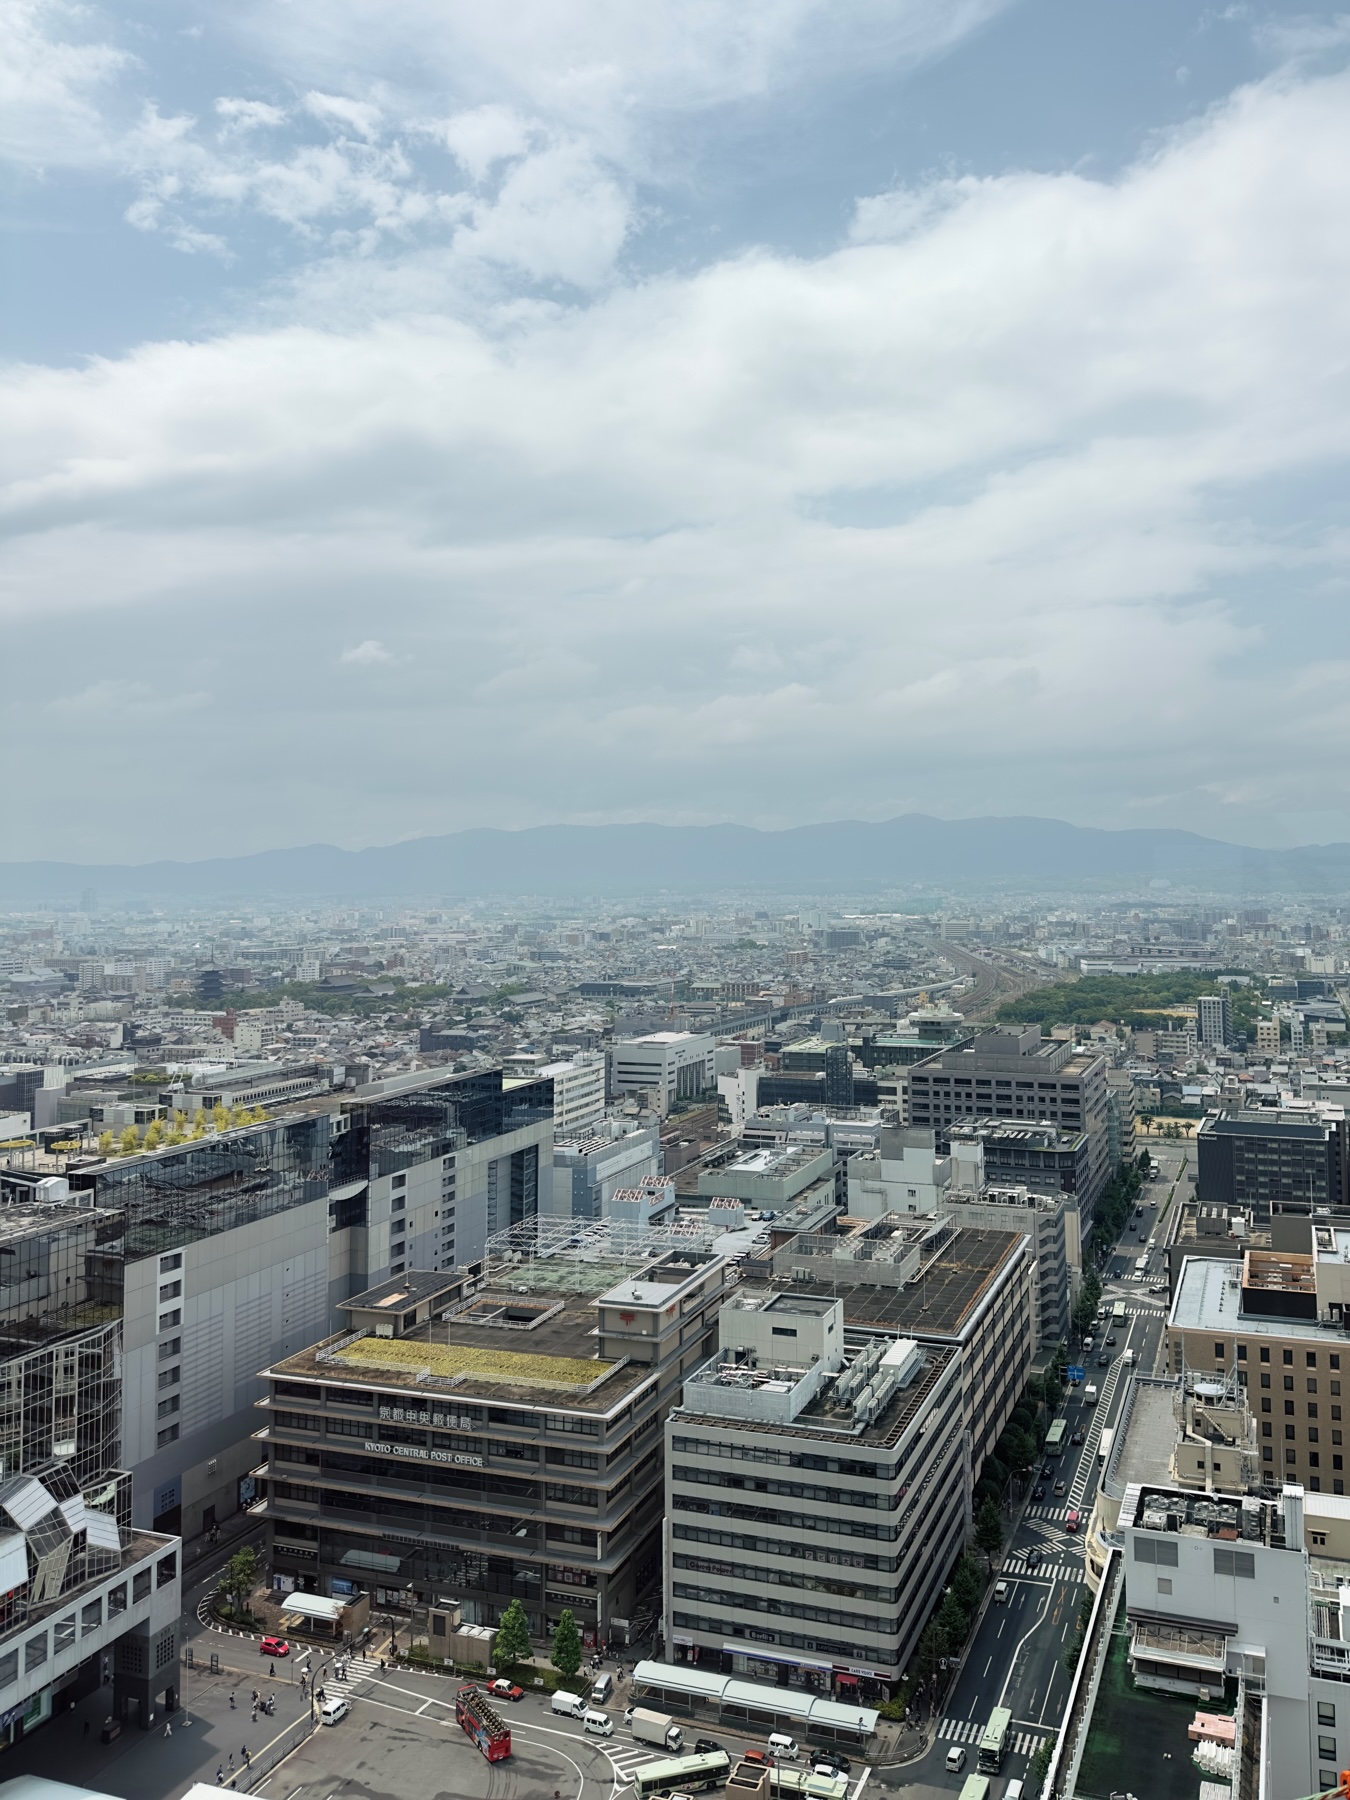 A view of the Kyoto Post Office from Kyoto Tower